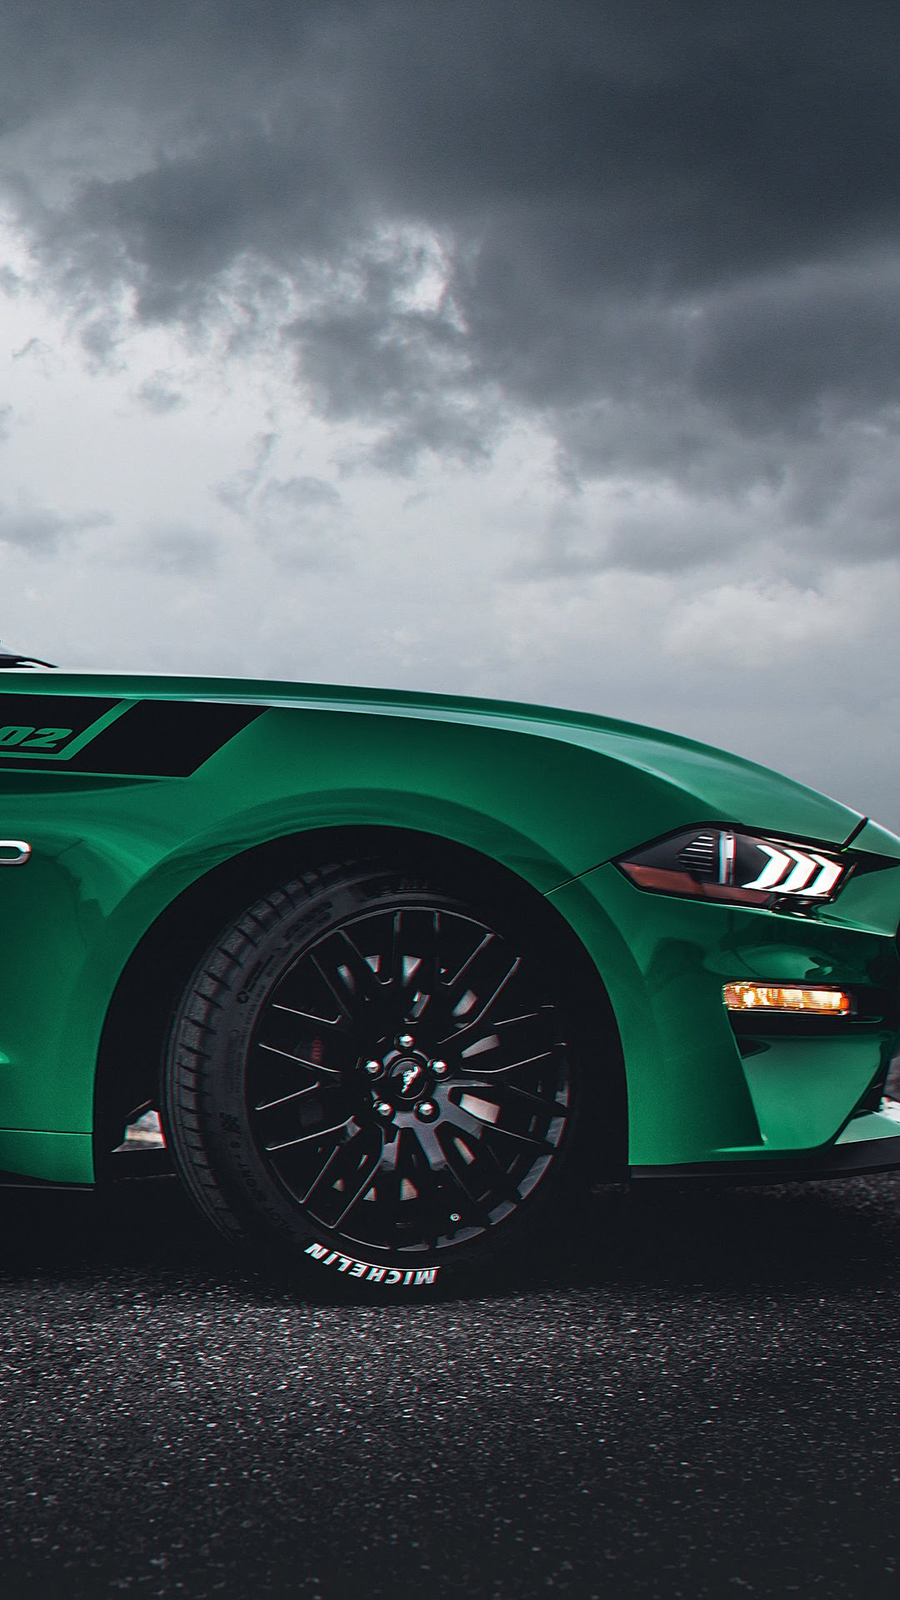 Mustang Car Wallpaper – Ford Muscle Cars Wallpapers Free Download